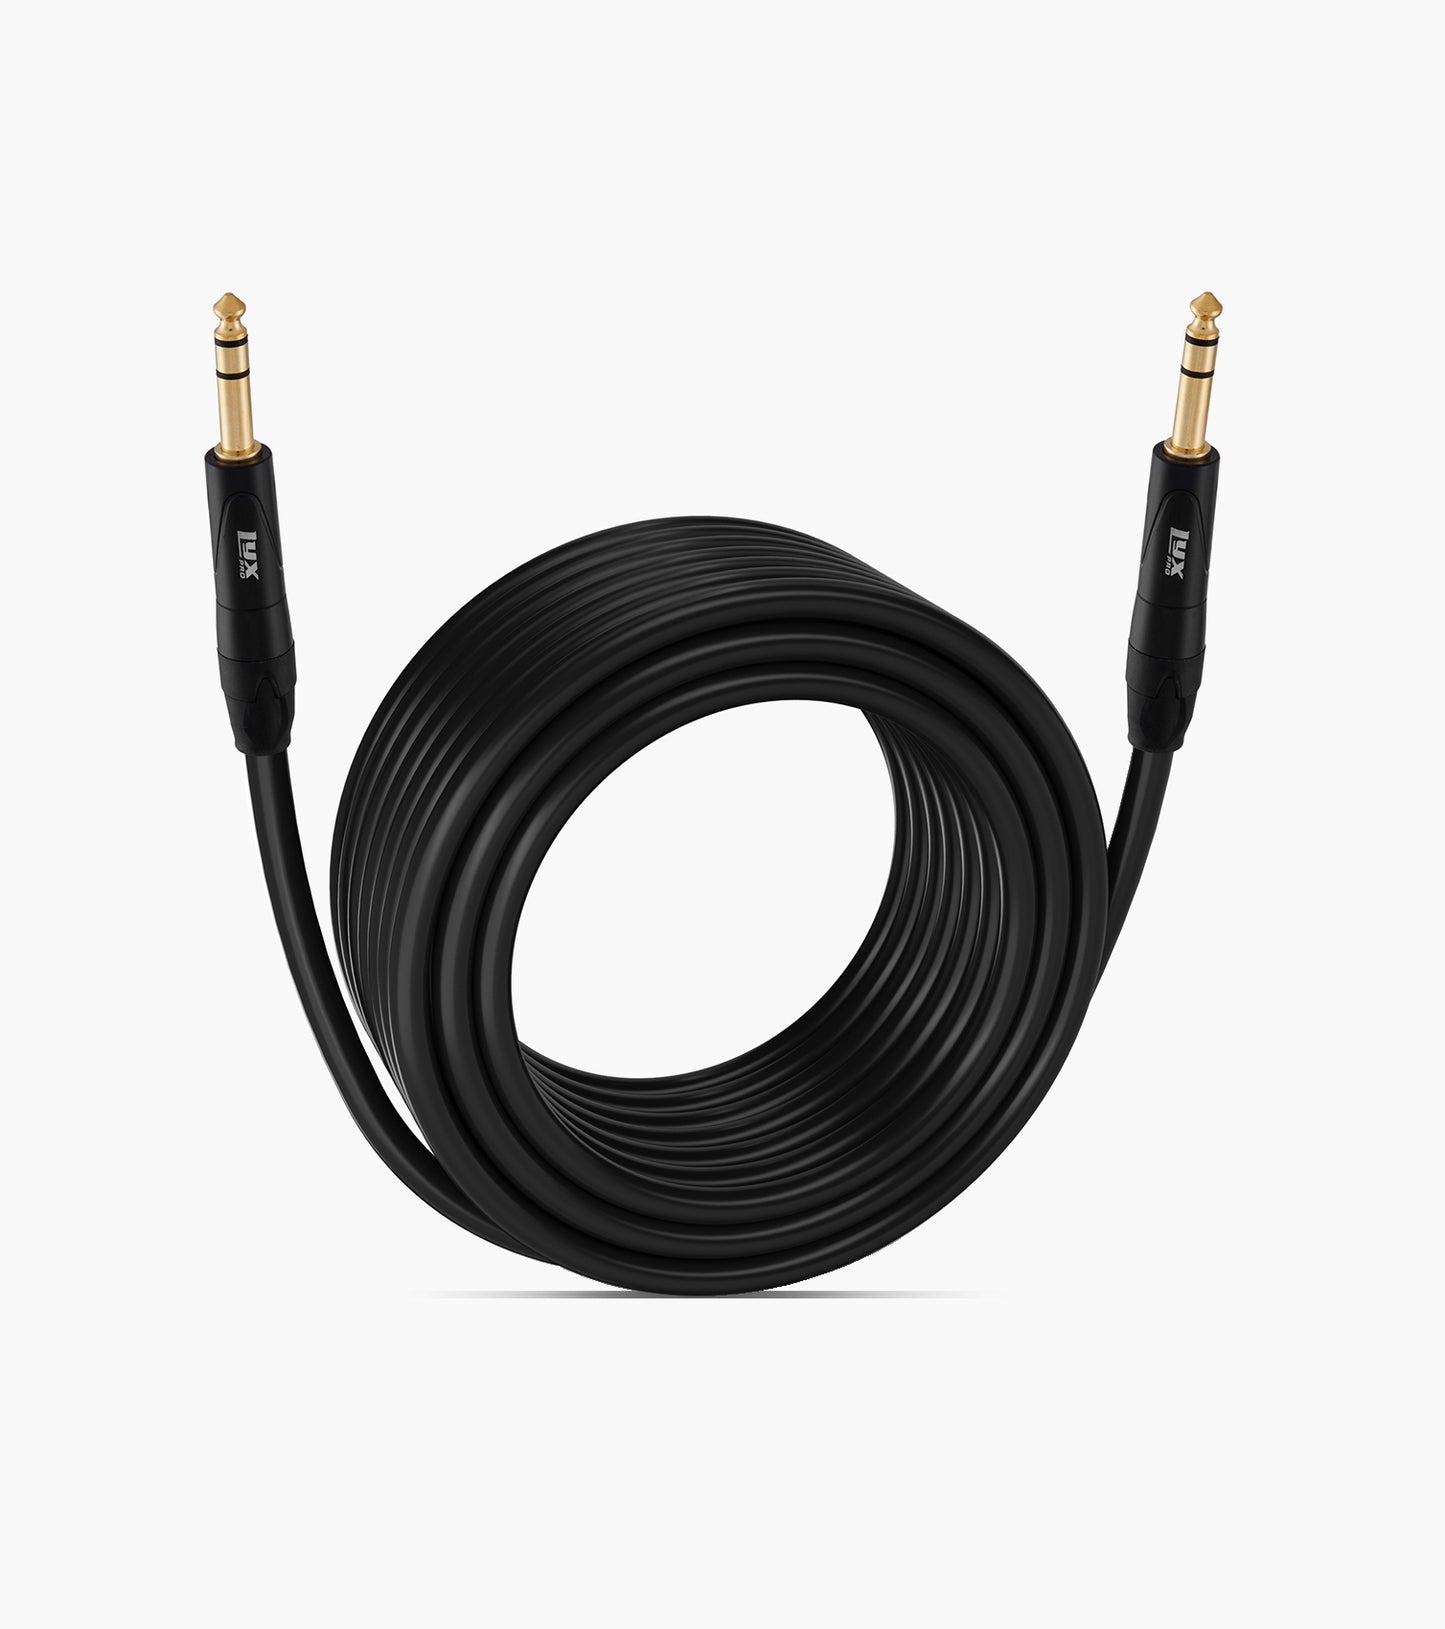 75 ft TRS audio cable